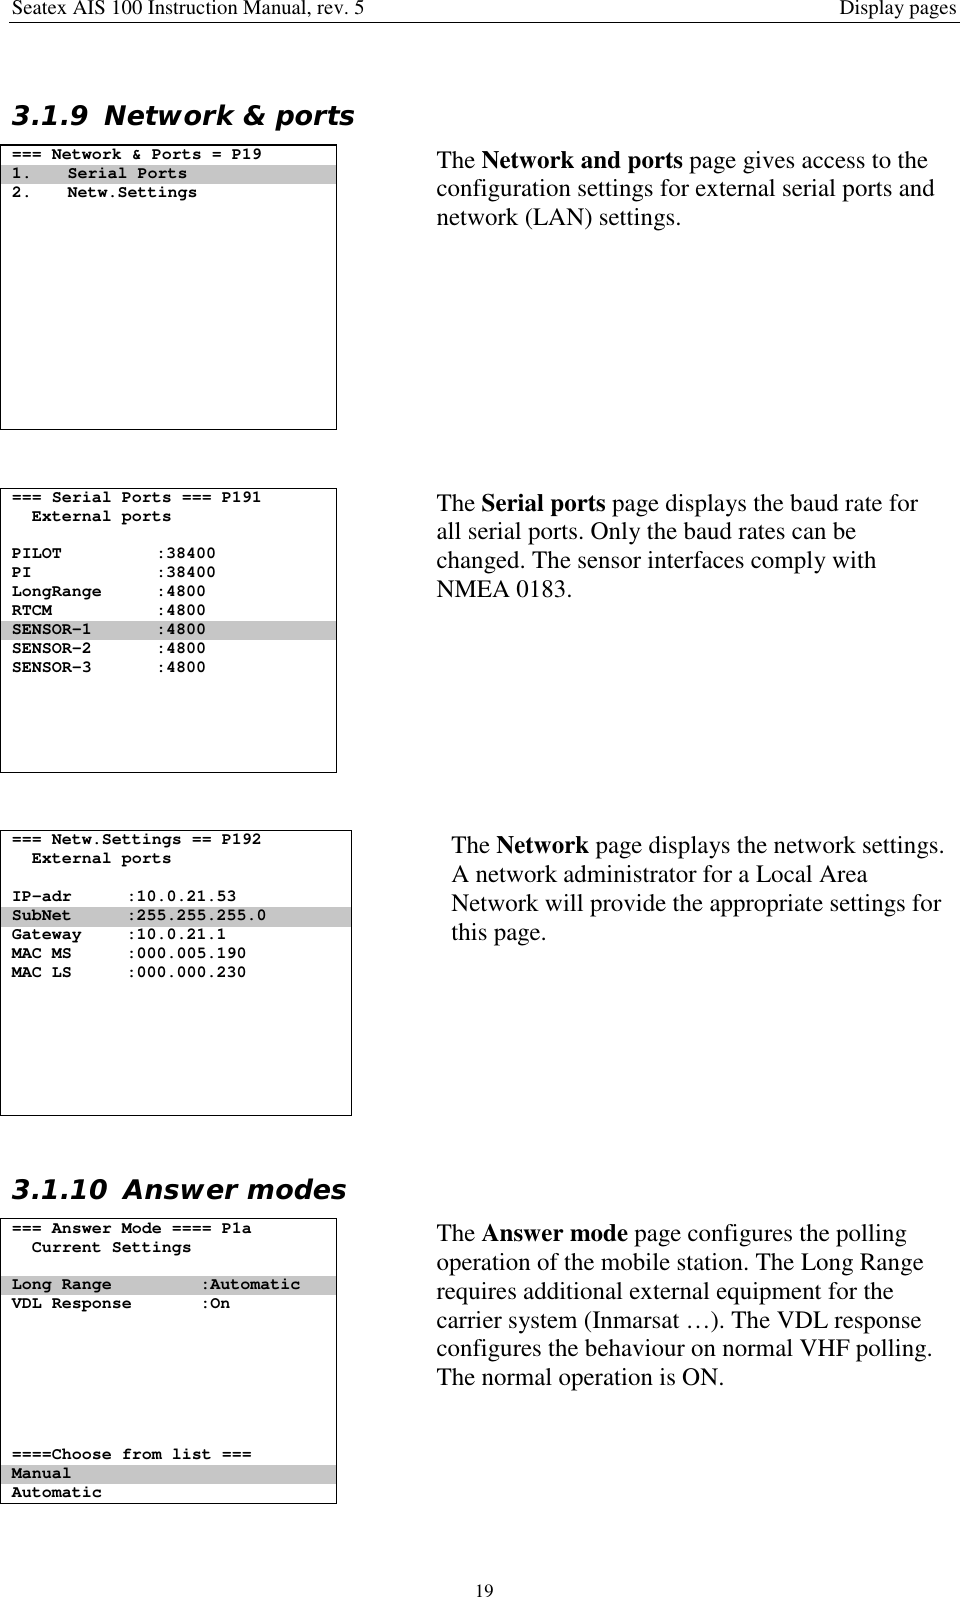 Seatex AIS 100 Instruction Manual, rev. 5 Display pages193.1.9 Network &amp; ports=== Network &amp; Ports = P191. Serial Ports2. Netw.SettingsThe Network and ports page gives access to theconfiguration settings for external serial ports andnetwork (LAN) settings.=== Serial Ports === P191External portsPILOT :38400PI :38400LongRange :4800RTCM :4800SENSOR-1 :4800SENSOR-2 :4800SENSOR-3 :4800The Serial ports page displays the baud rate forall serial ports. Only the baud rates can bechanged. The sensor interfaces comply withNMEA 0183.=== Netw.Settings == P192External portsIP-adr :10.0.21.53SubNet :255.255.255.0Gateway :10.0.21.1MAC MS :000.005.190MAC LS :000.000.230The Network page displays the network settings.A network administrator for a Local AreaNetwork will provide the appropriate settings forthis page.3.1.10 Answer modes=== Answer Mode ==== P1aCurrent SettingsLong Range :AutomaticVDL Response :On====Choose from list ===ManualAutomaticThe Answer mode page configures the pollingoperation of the mobile station. The Long Rangerequires additional external equipment for thecarrier system (Inmarsat …). The VDL responseconfigures the behaviour on normal VHF polling.The normal operation is ON.